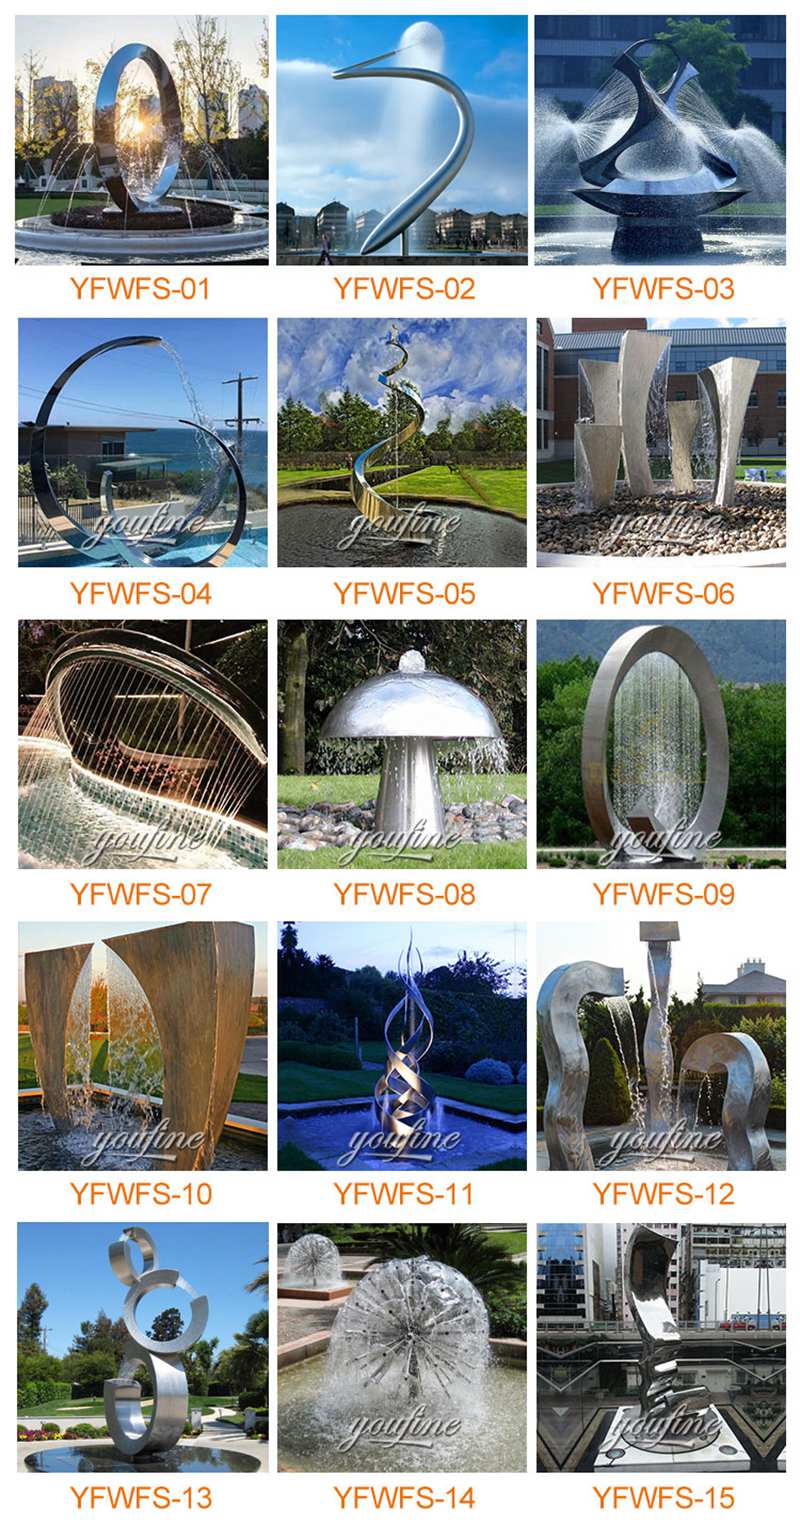 More Stainless Steel Water Features